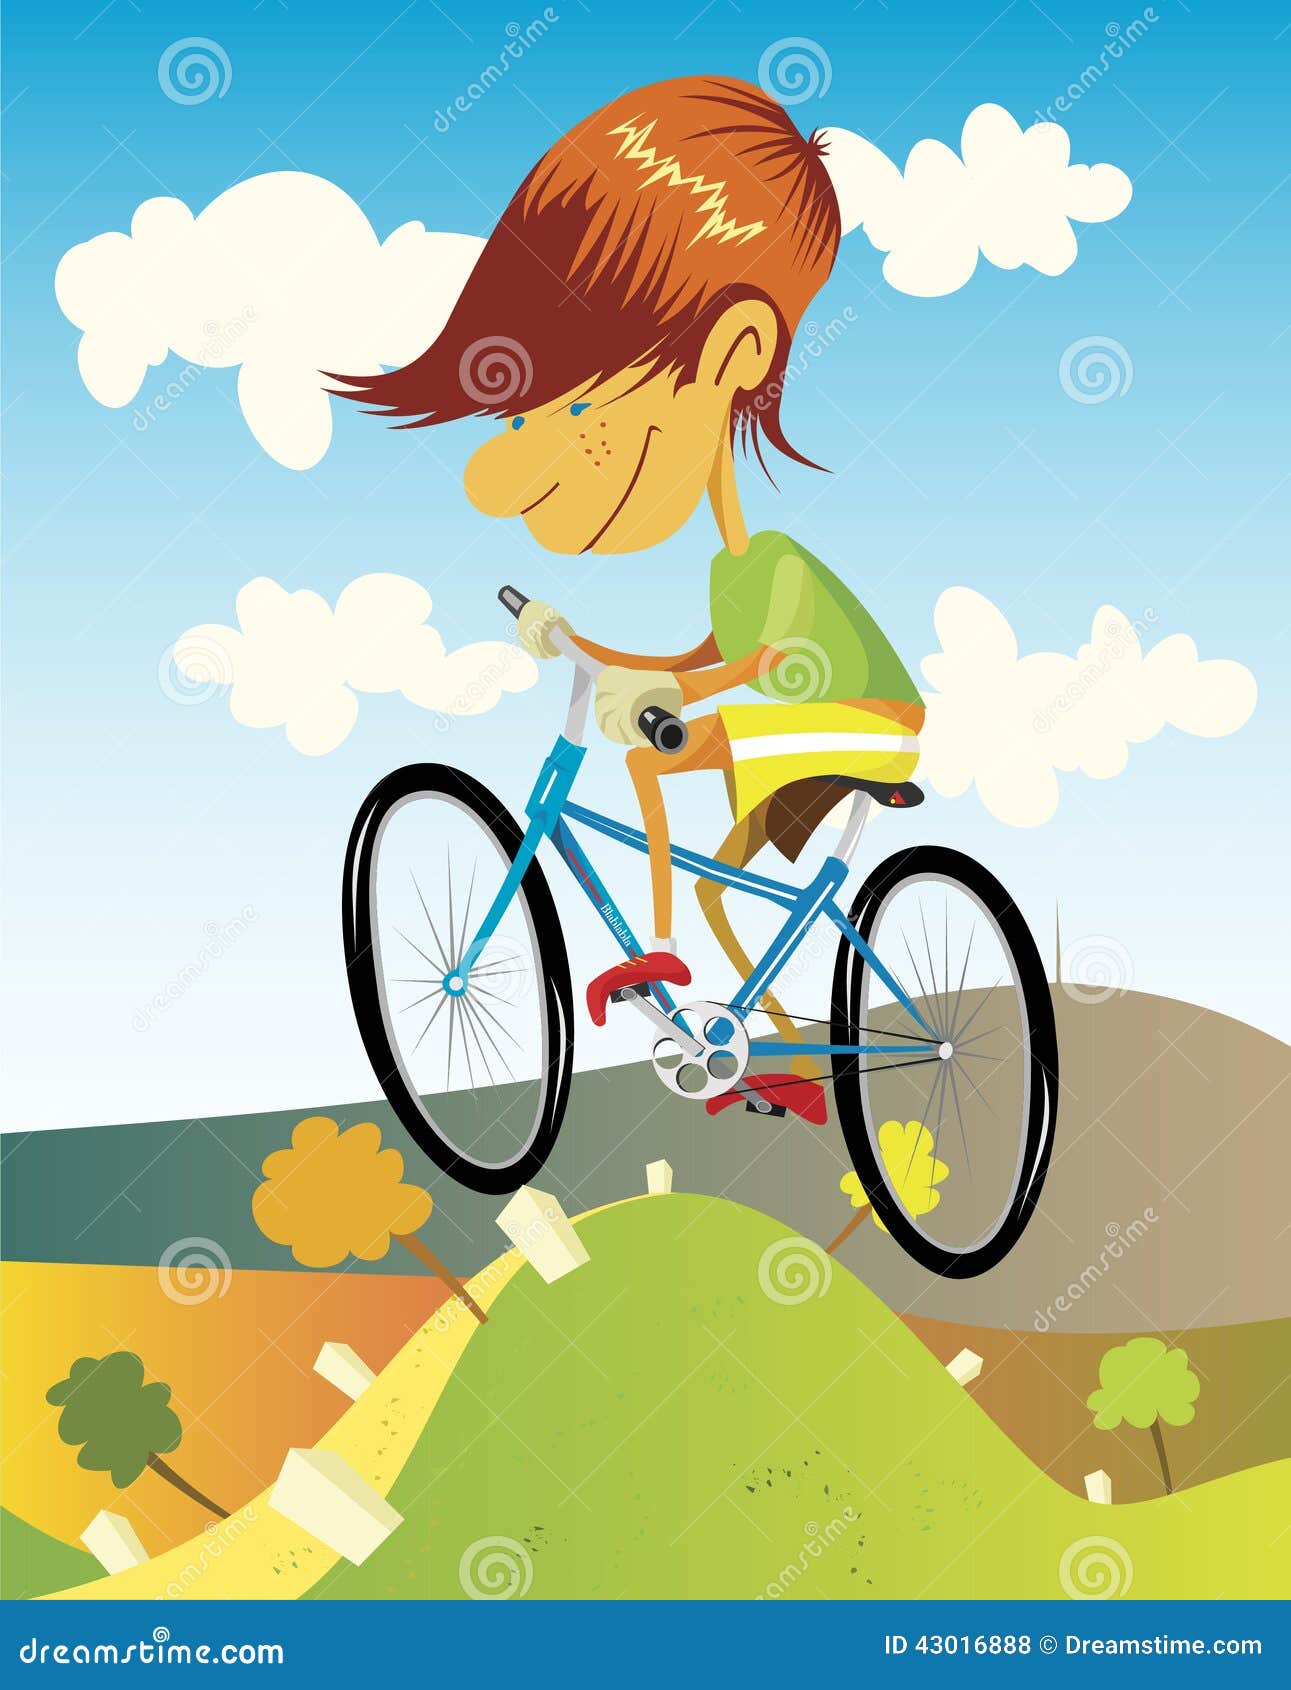 Ride a bike stock vector. Illustration of length, hill - 43016888